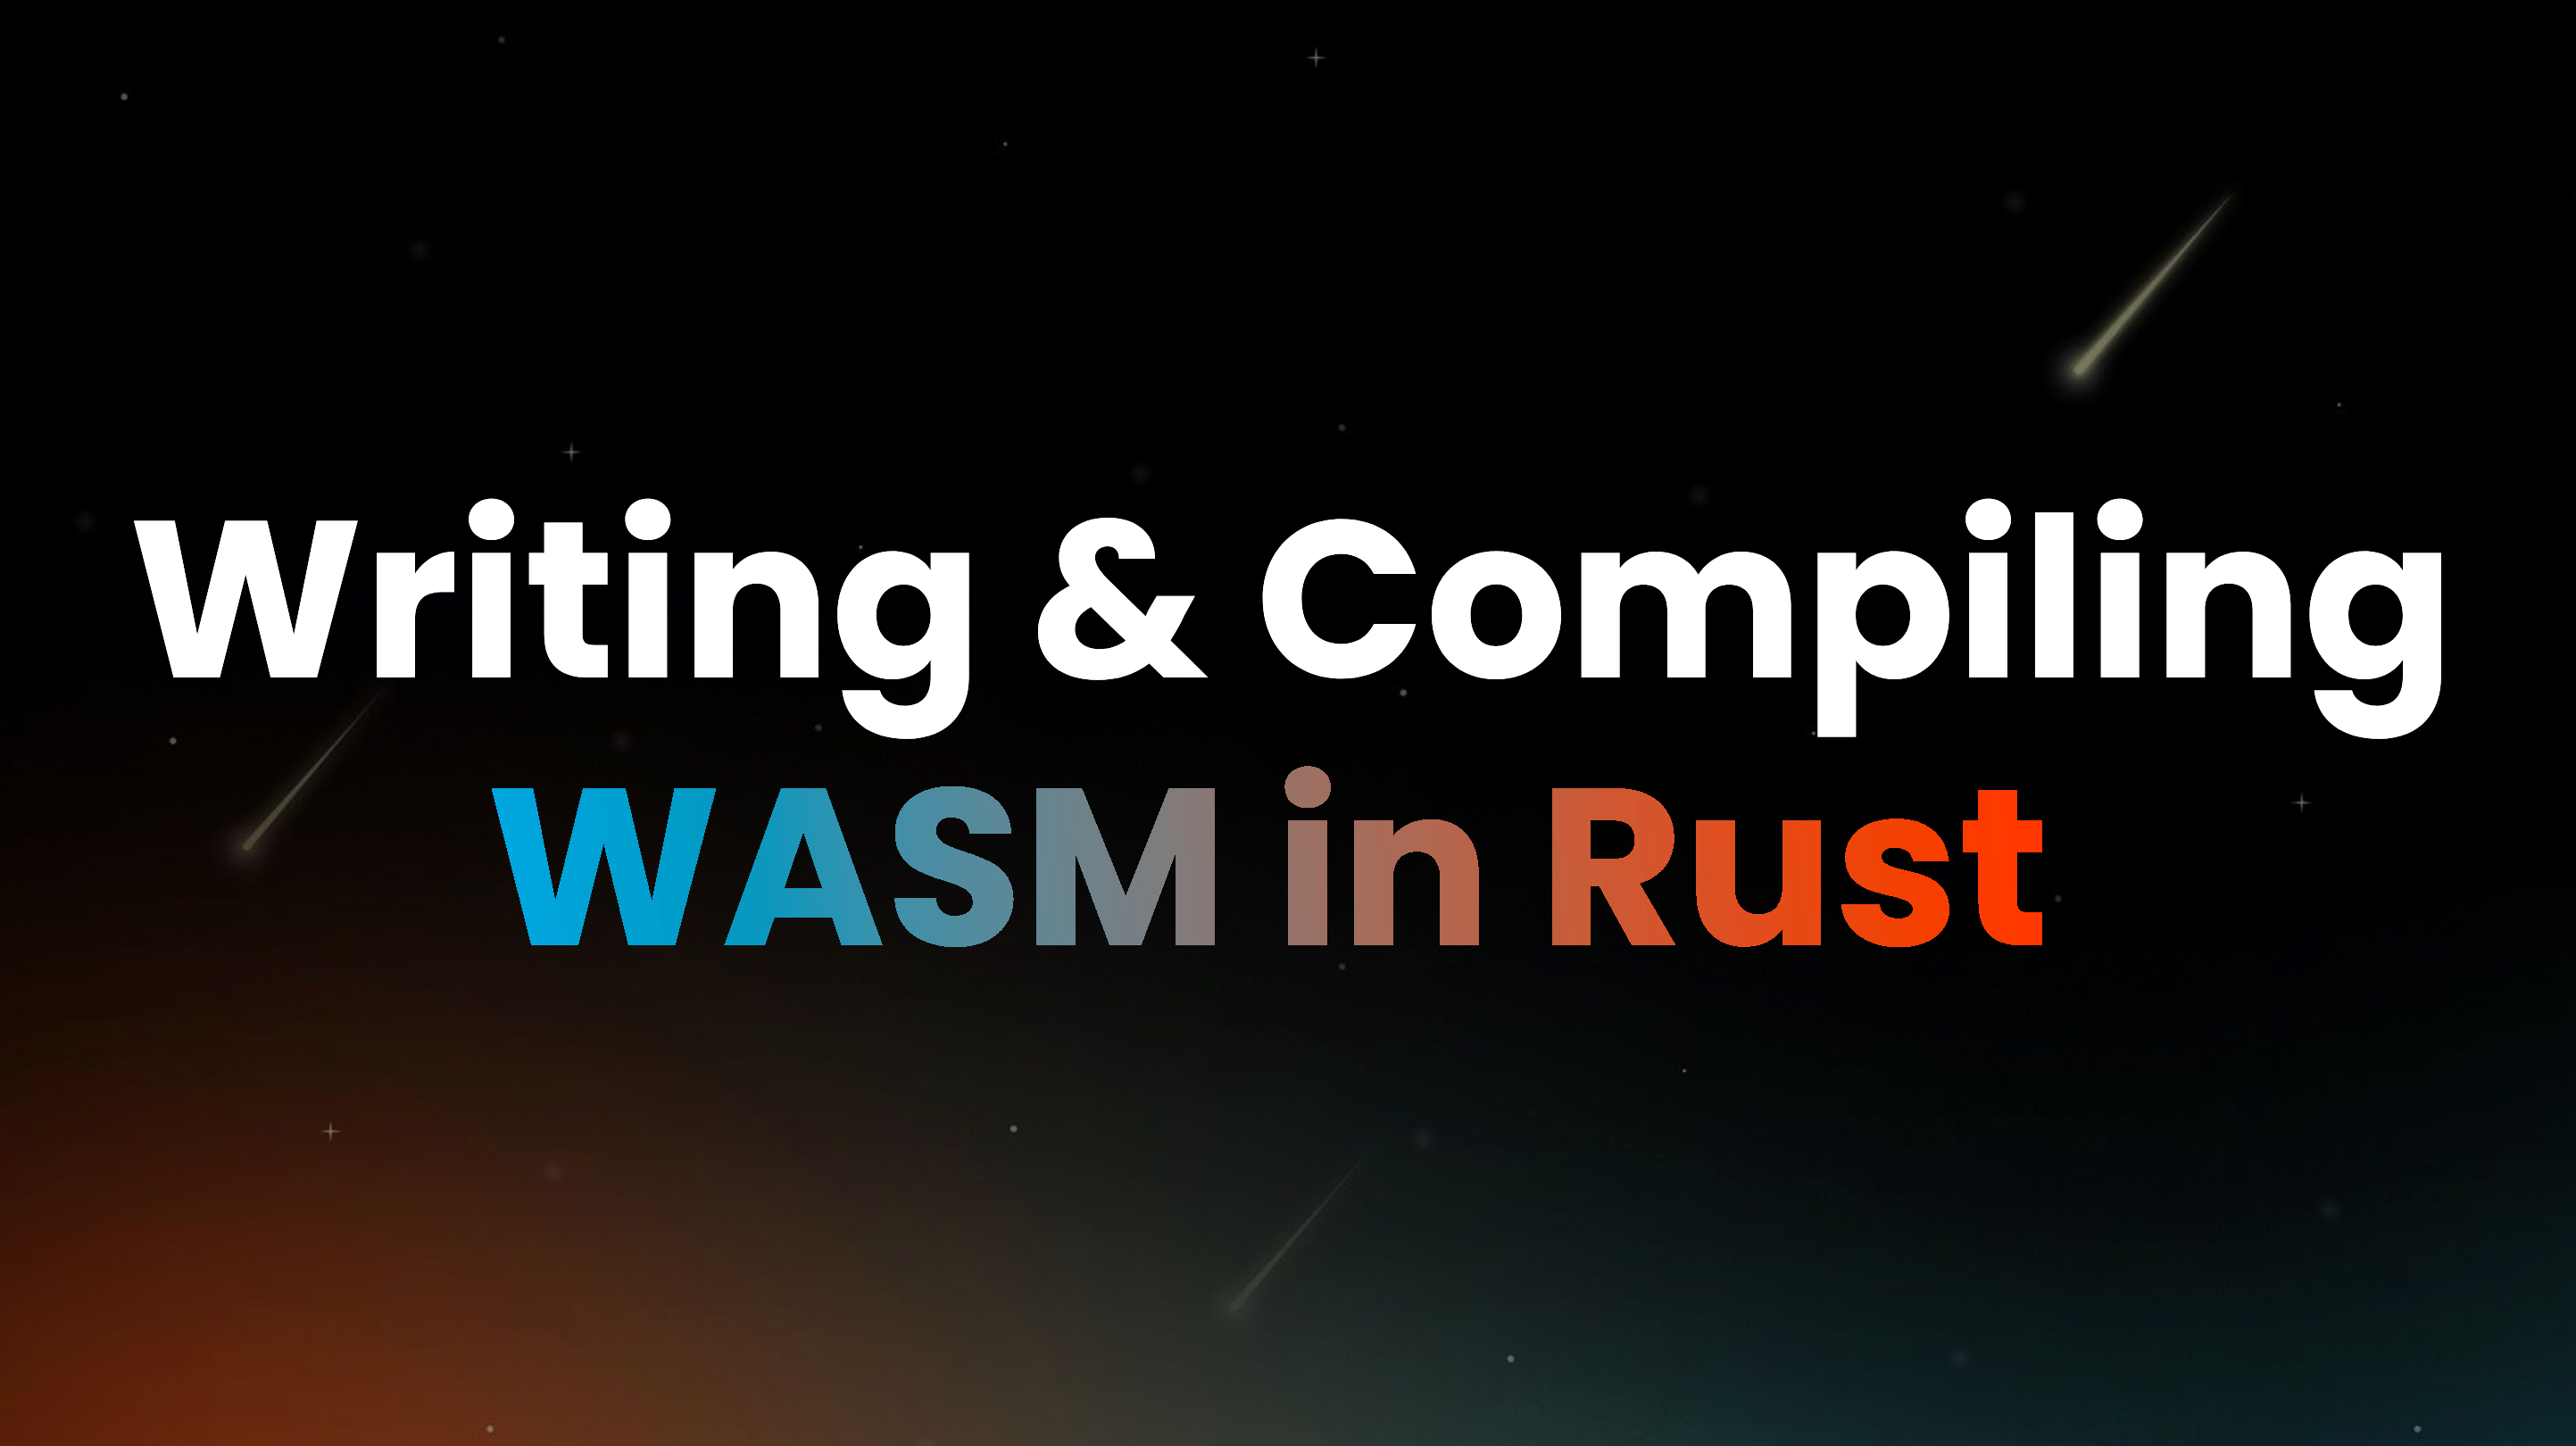 Writing & Compiling WASM in Rust